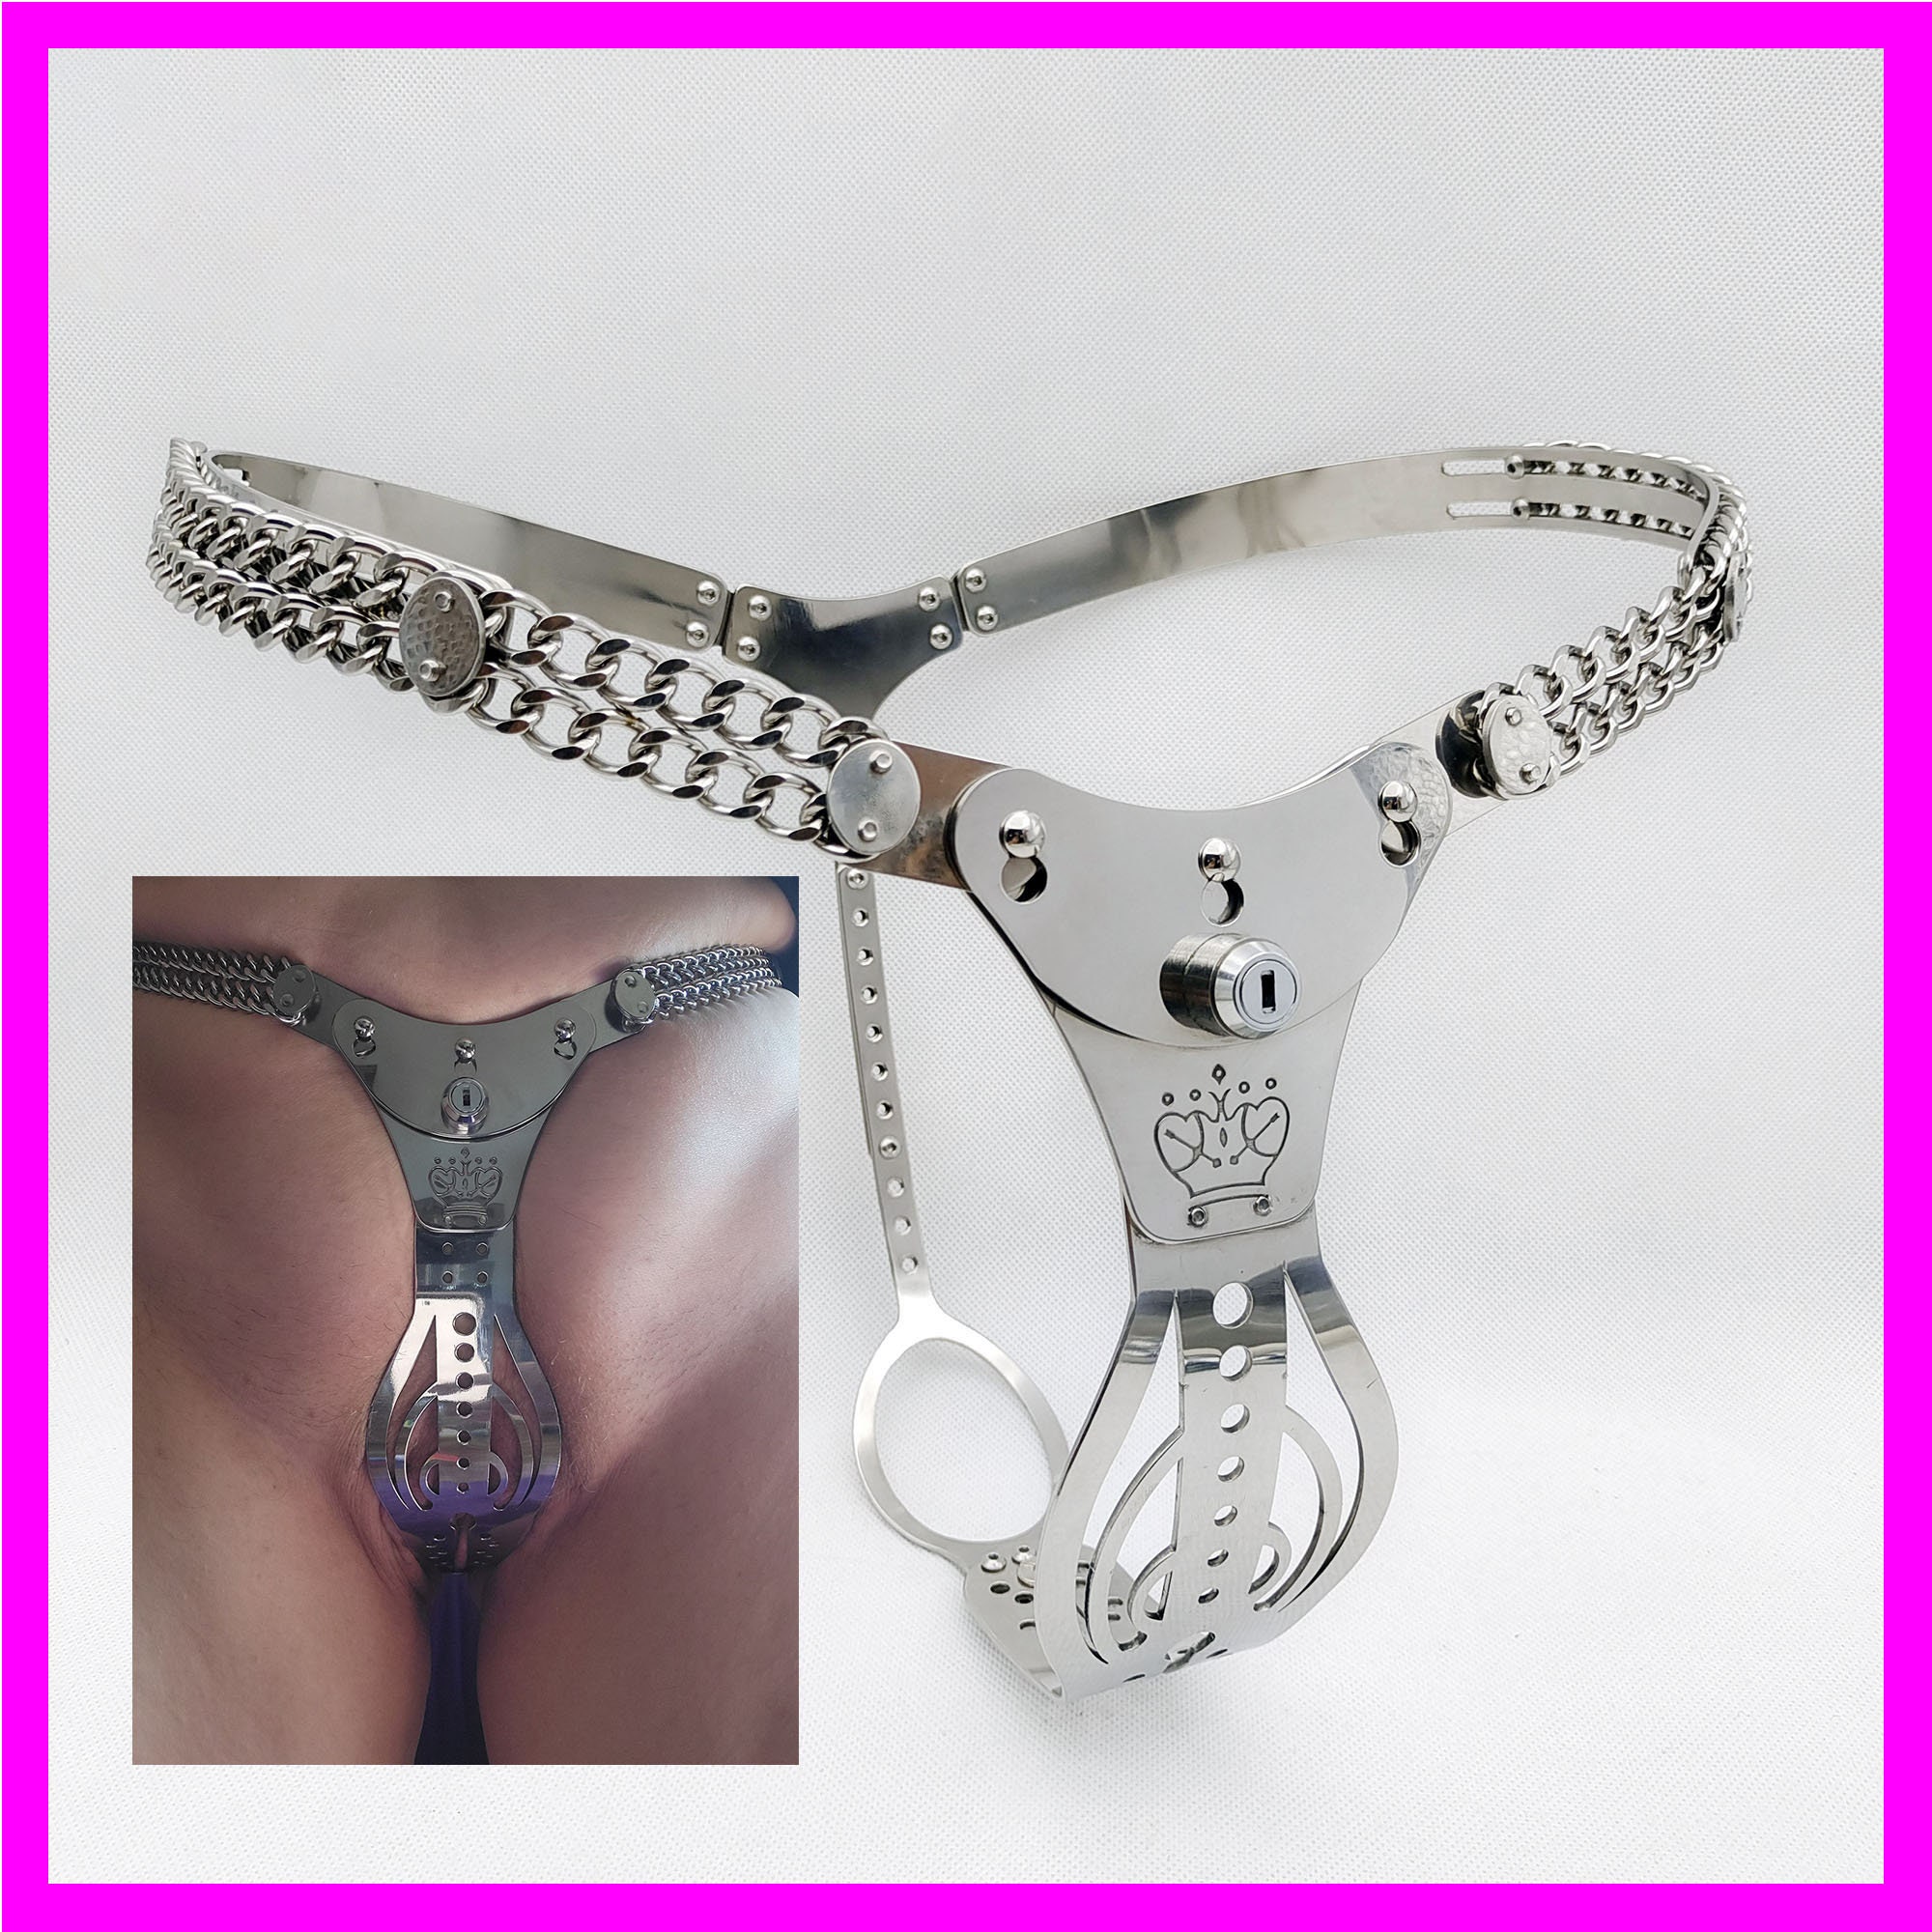 audrey humphreys add anal only chastity belt photo